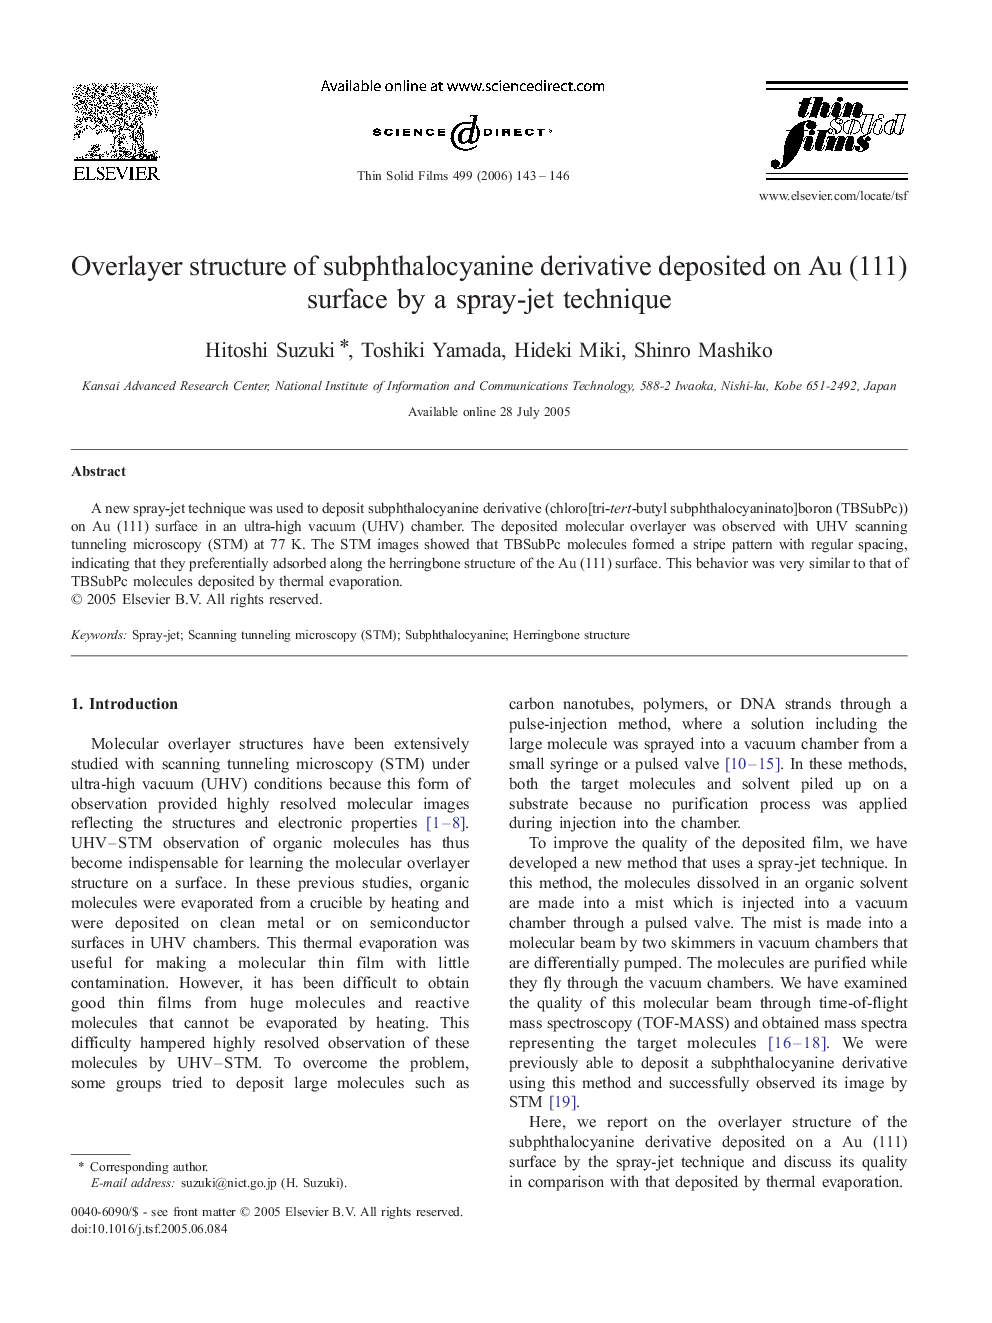 Overlayer structure of subphthalocyanine derivative deposited on Au (111) surface by a spray-jet technique